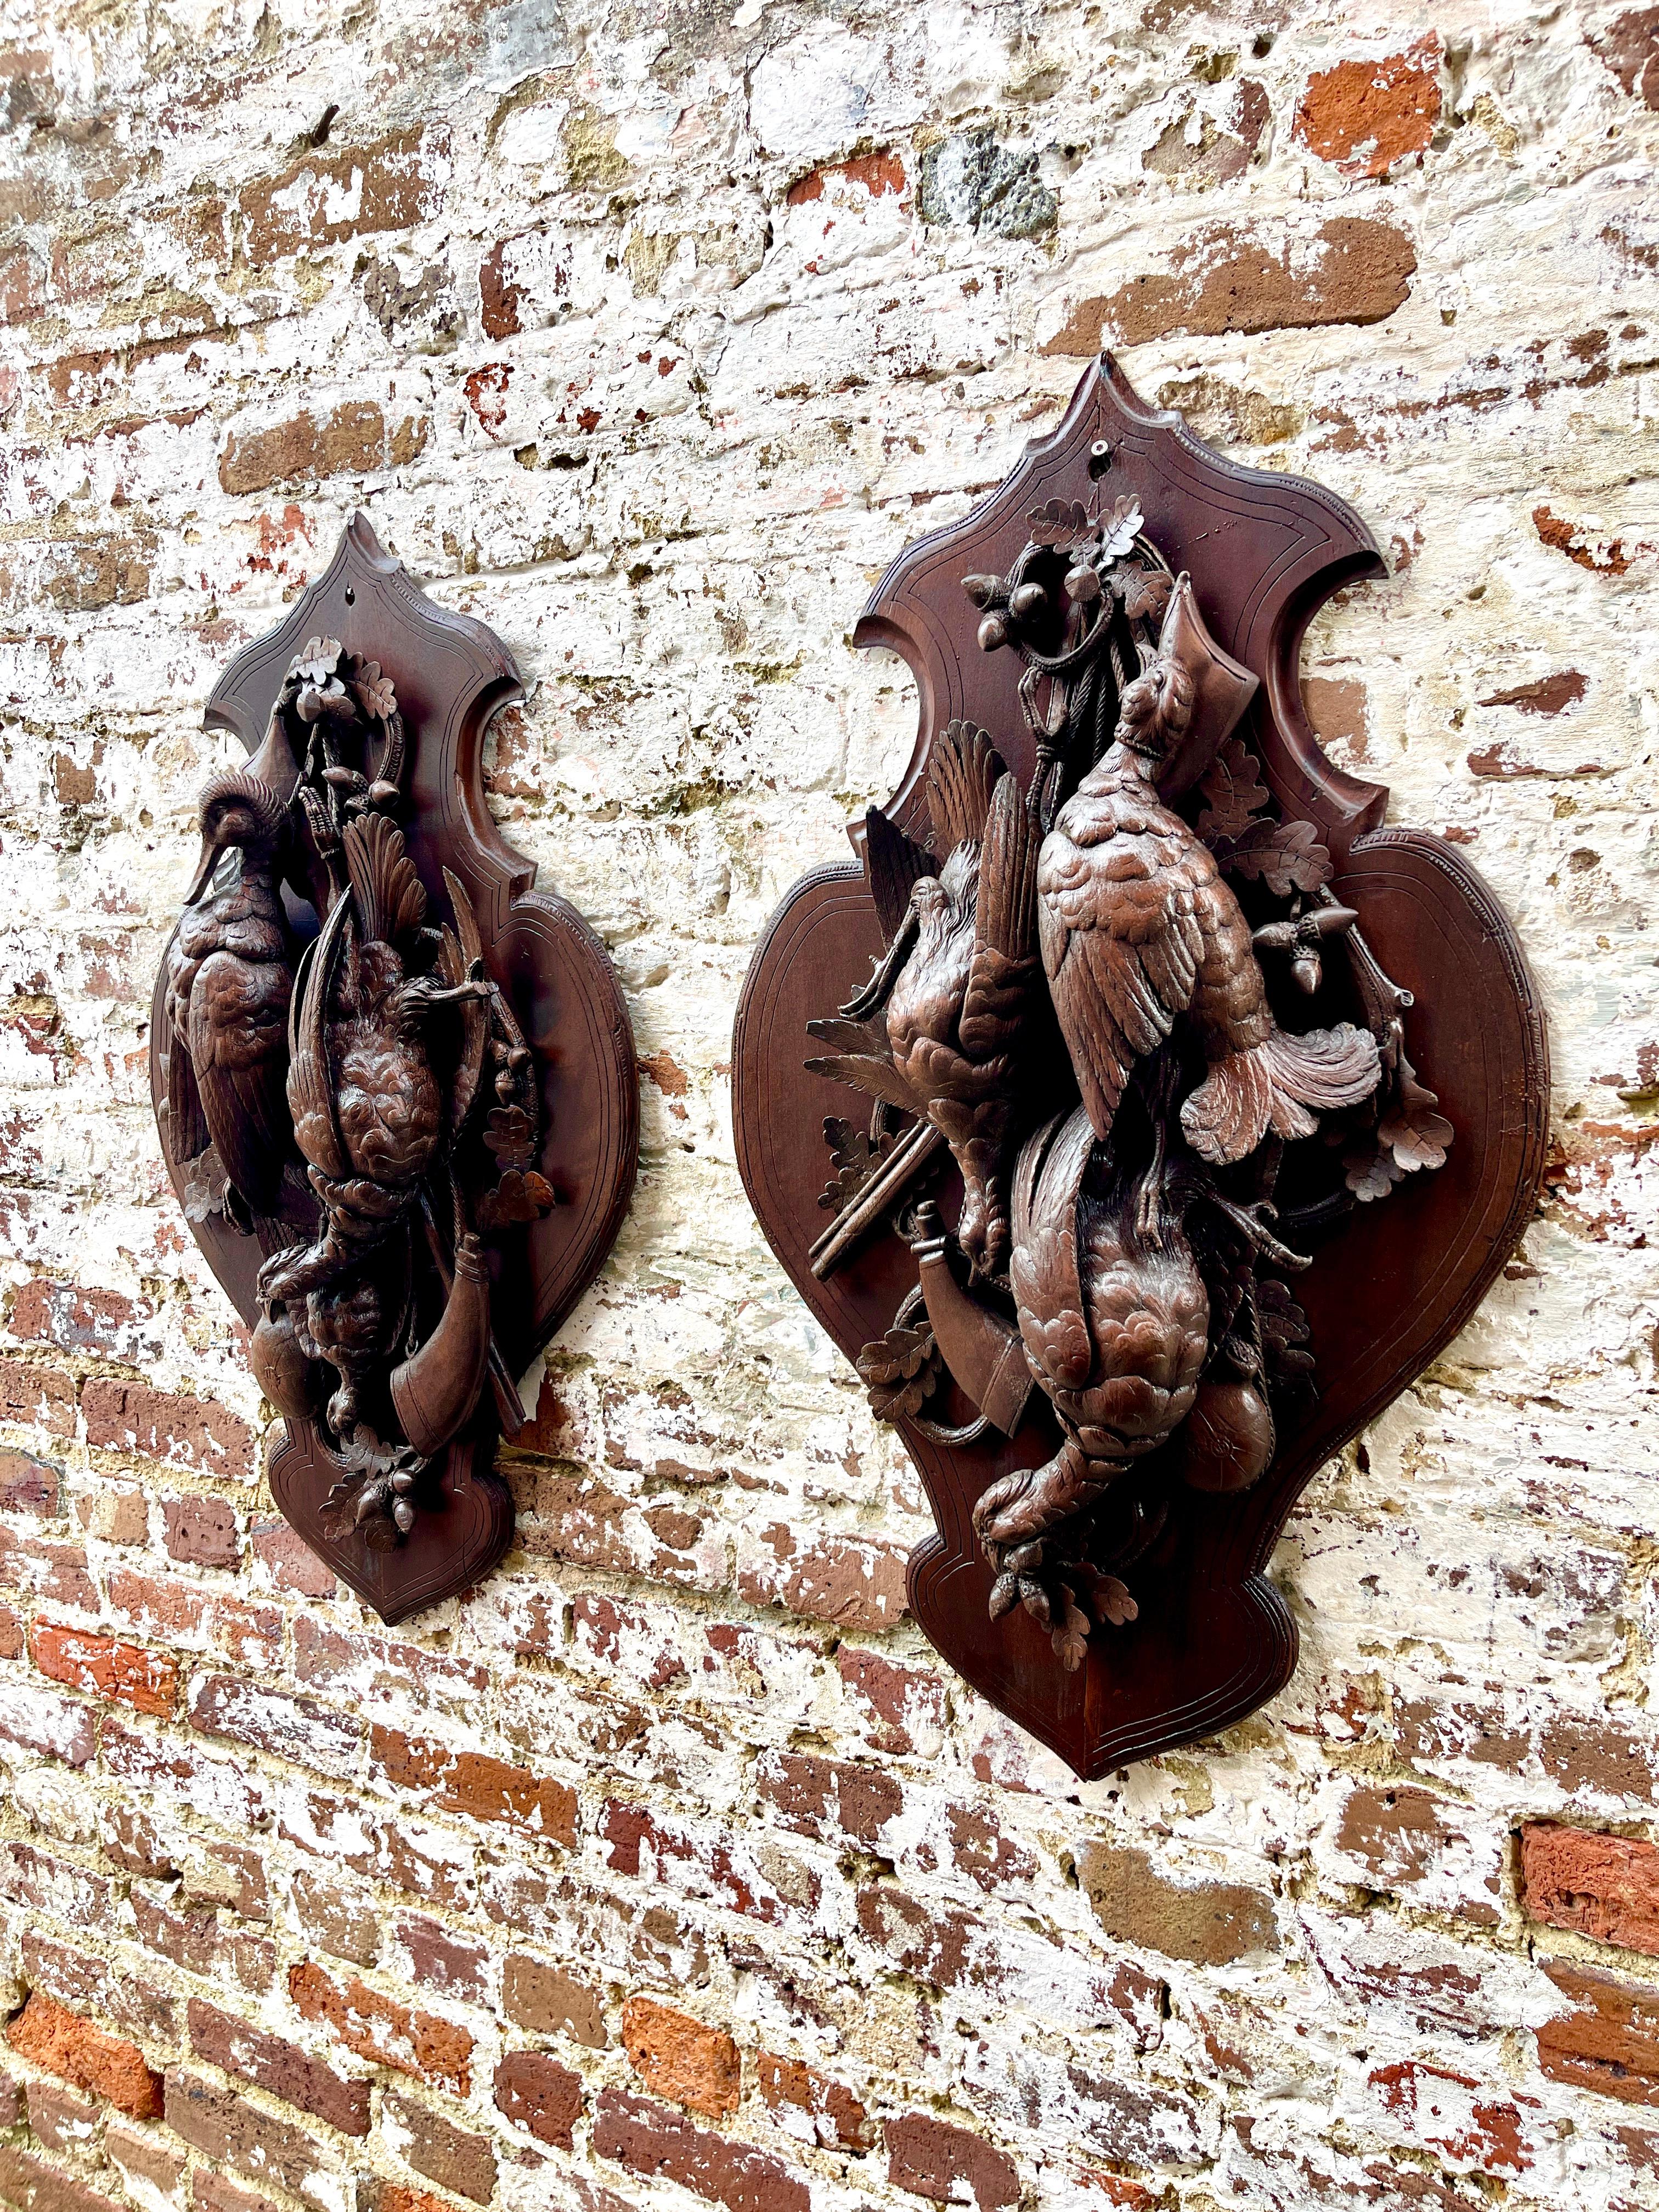 Pair of German Black Forest Game Plaques, 19th Century, wood carvings with trophies of game birds, powder horns, rifles and oak branches on cartouch shaped panel.